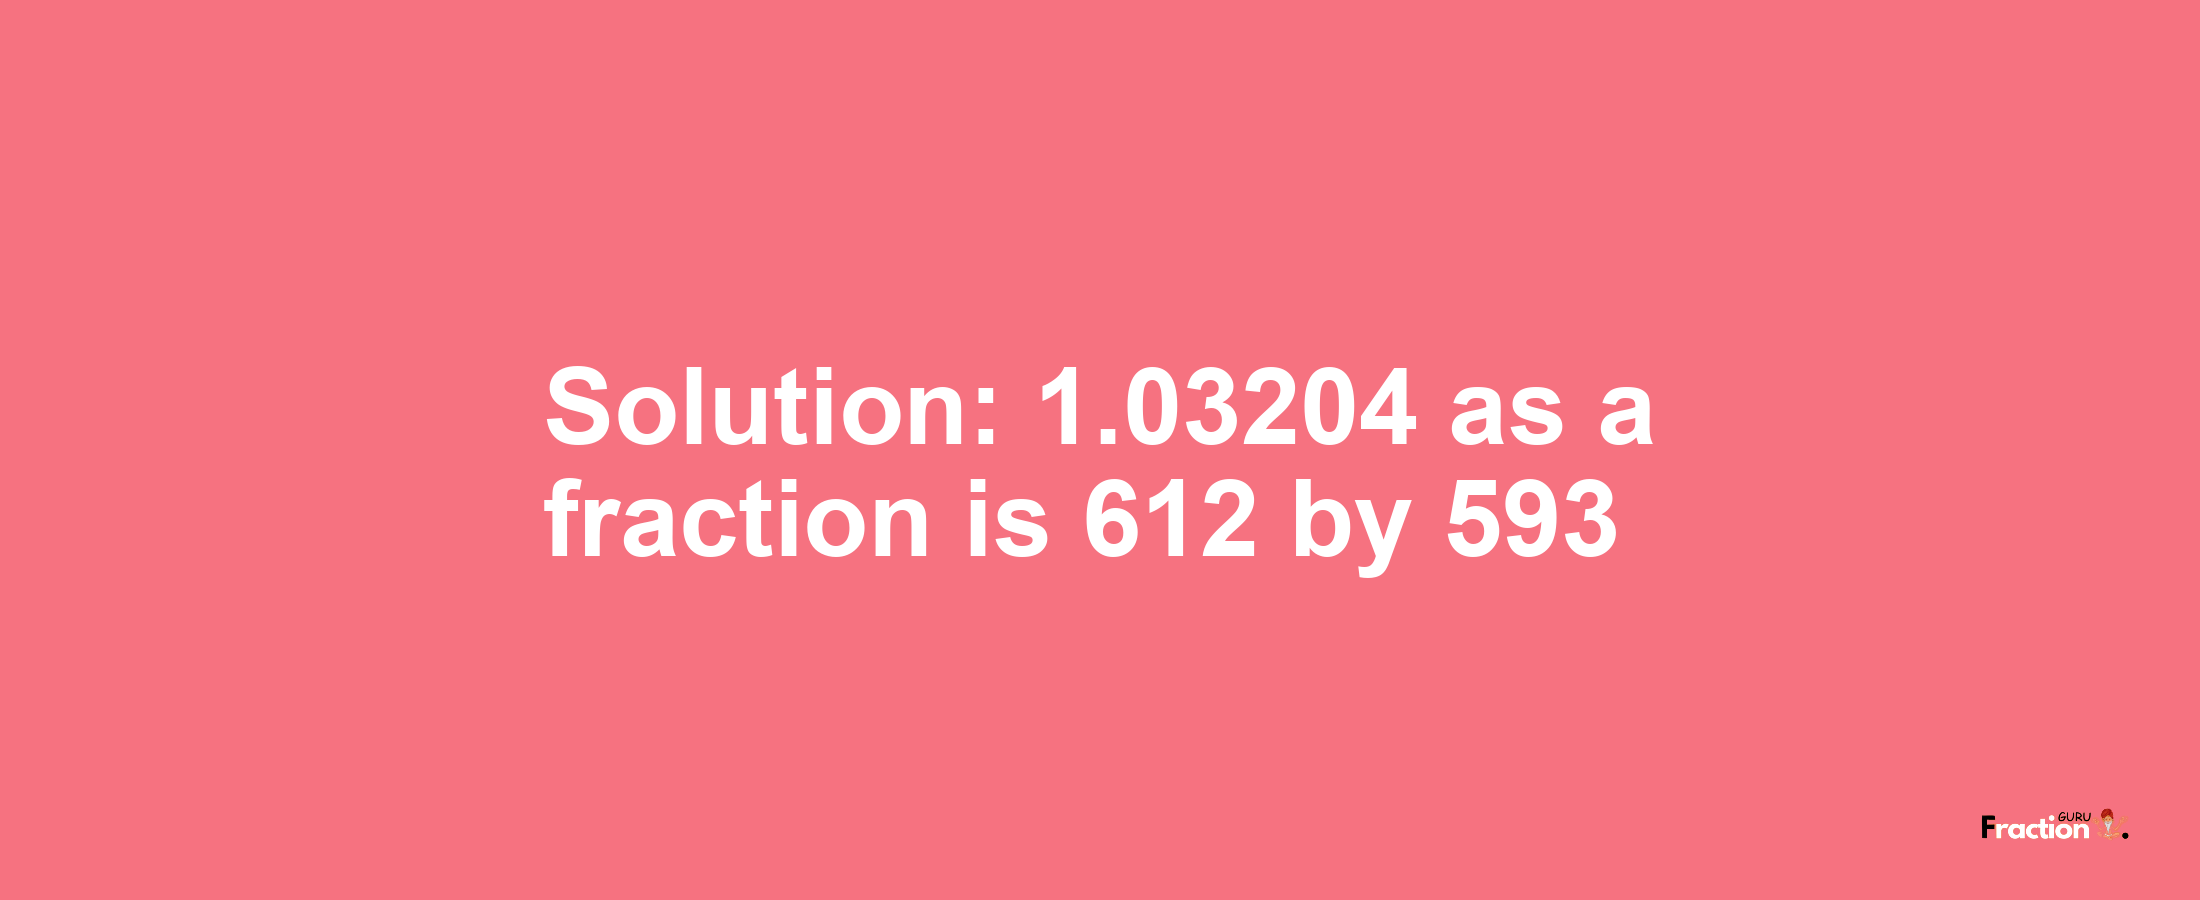 Solution:1.03204 as a fraction is 612/593